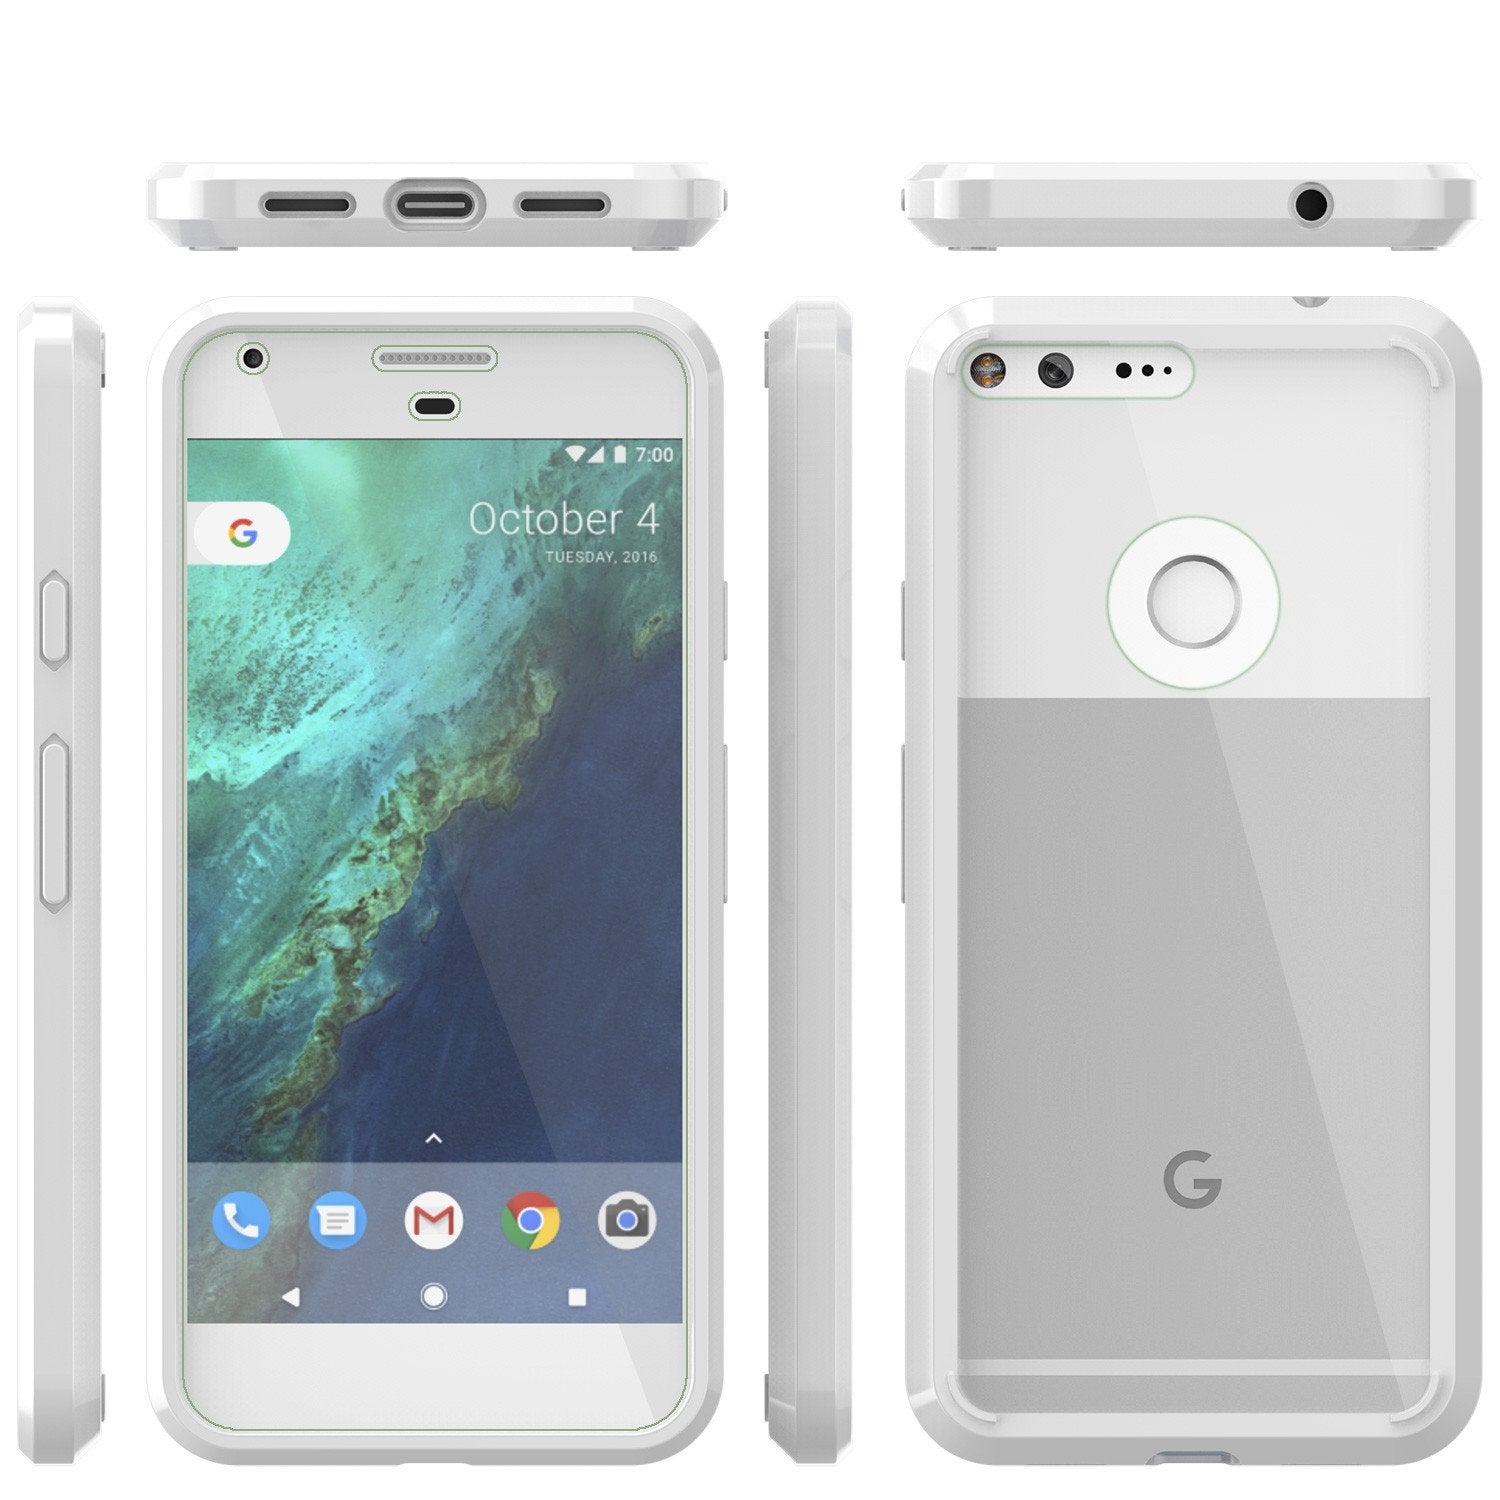 Google Pixel Case Punkcase® LUCID 2.0 White Series w/ PUNK SHIELD Glass Screen Protector | Ultra Fit